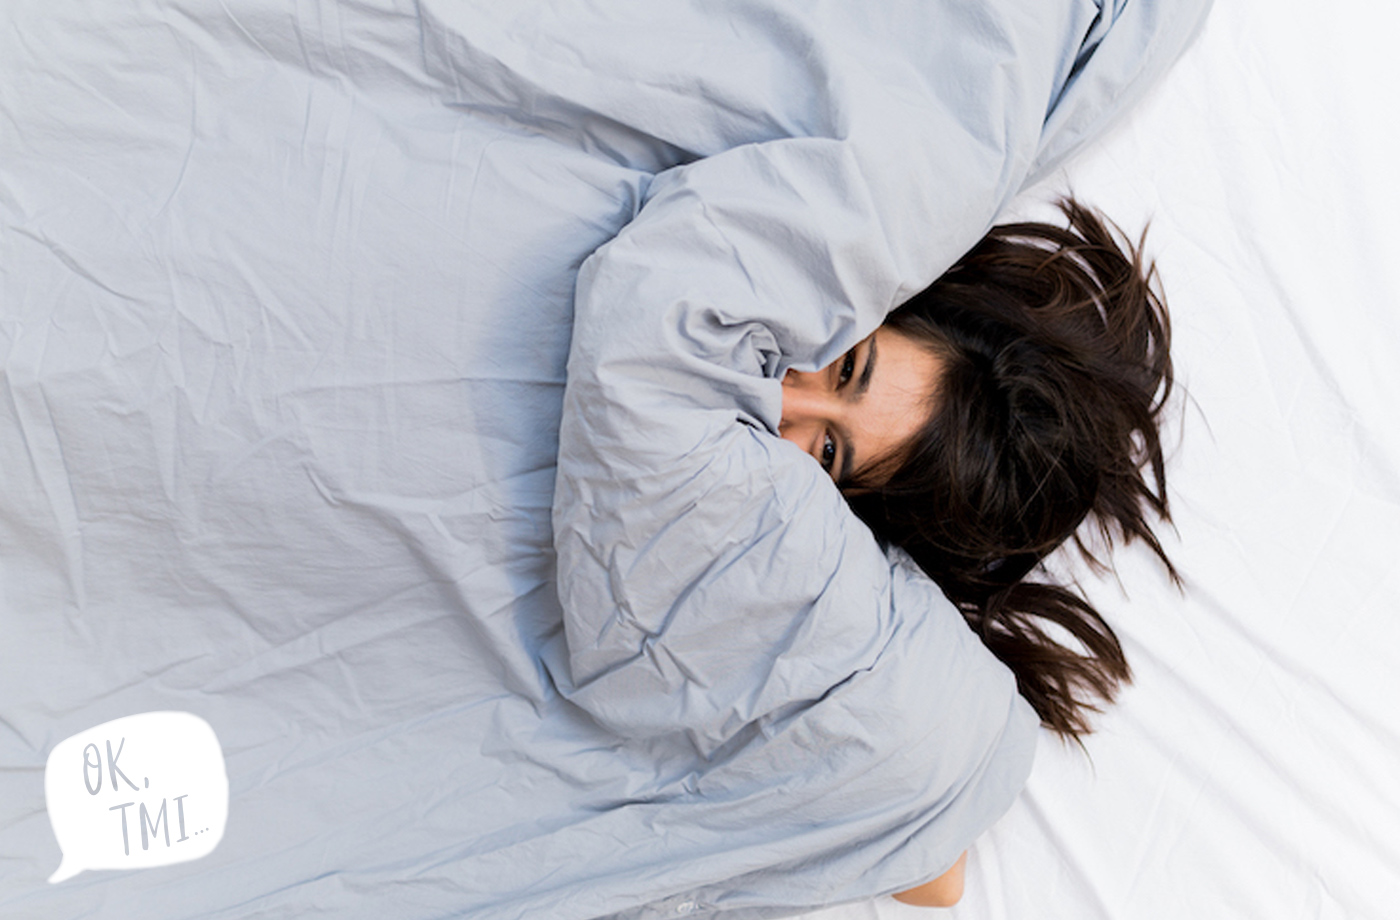 A woman pokes her head out from under a duvet cover.